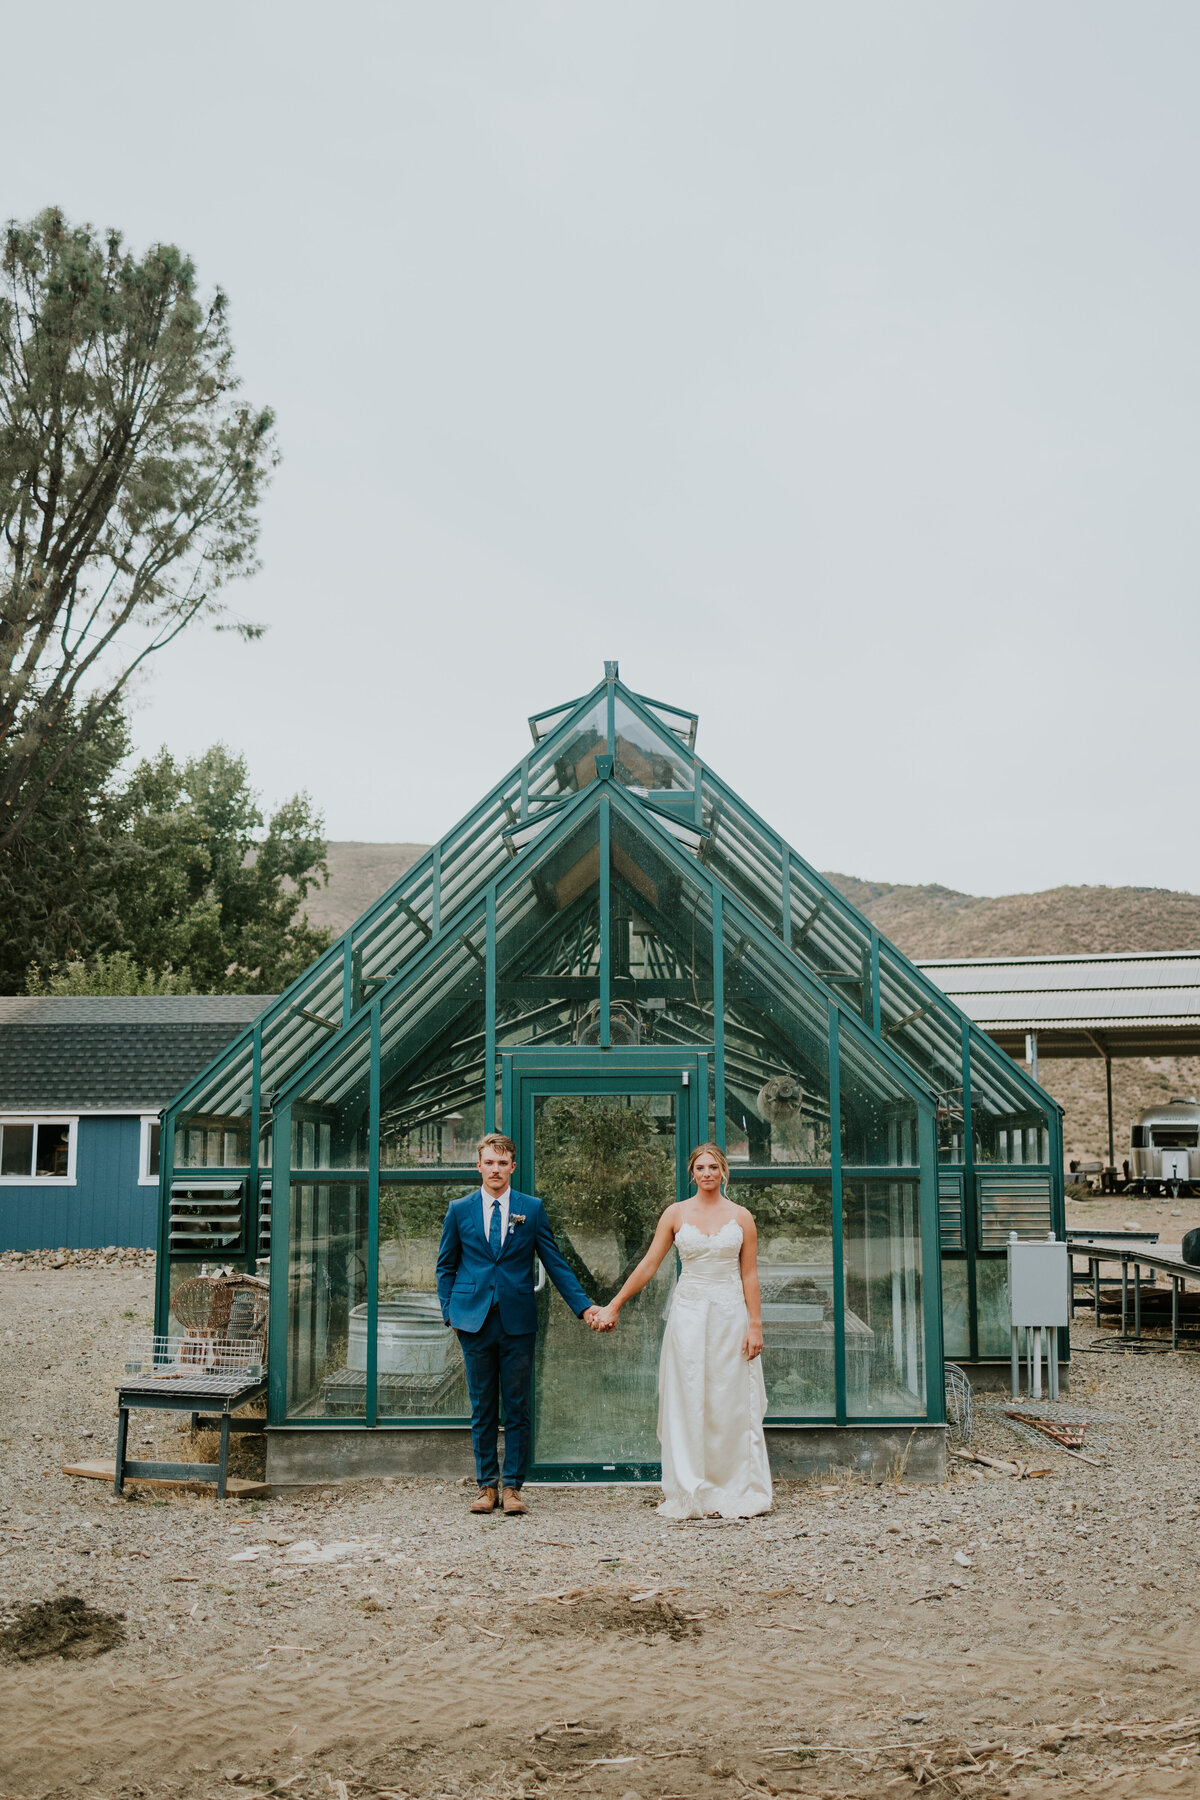 Bride and groom stand apart while holding hands in front of greenhouse.